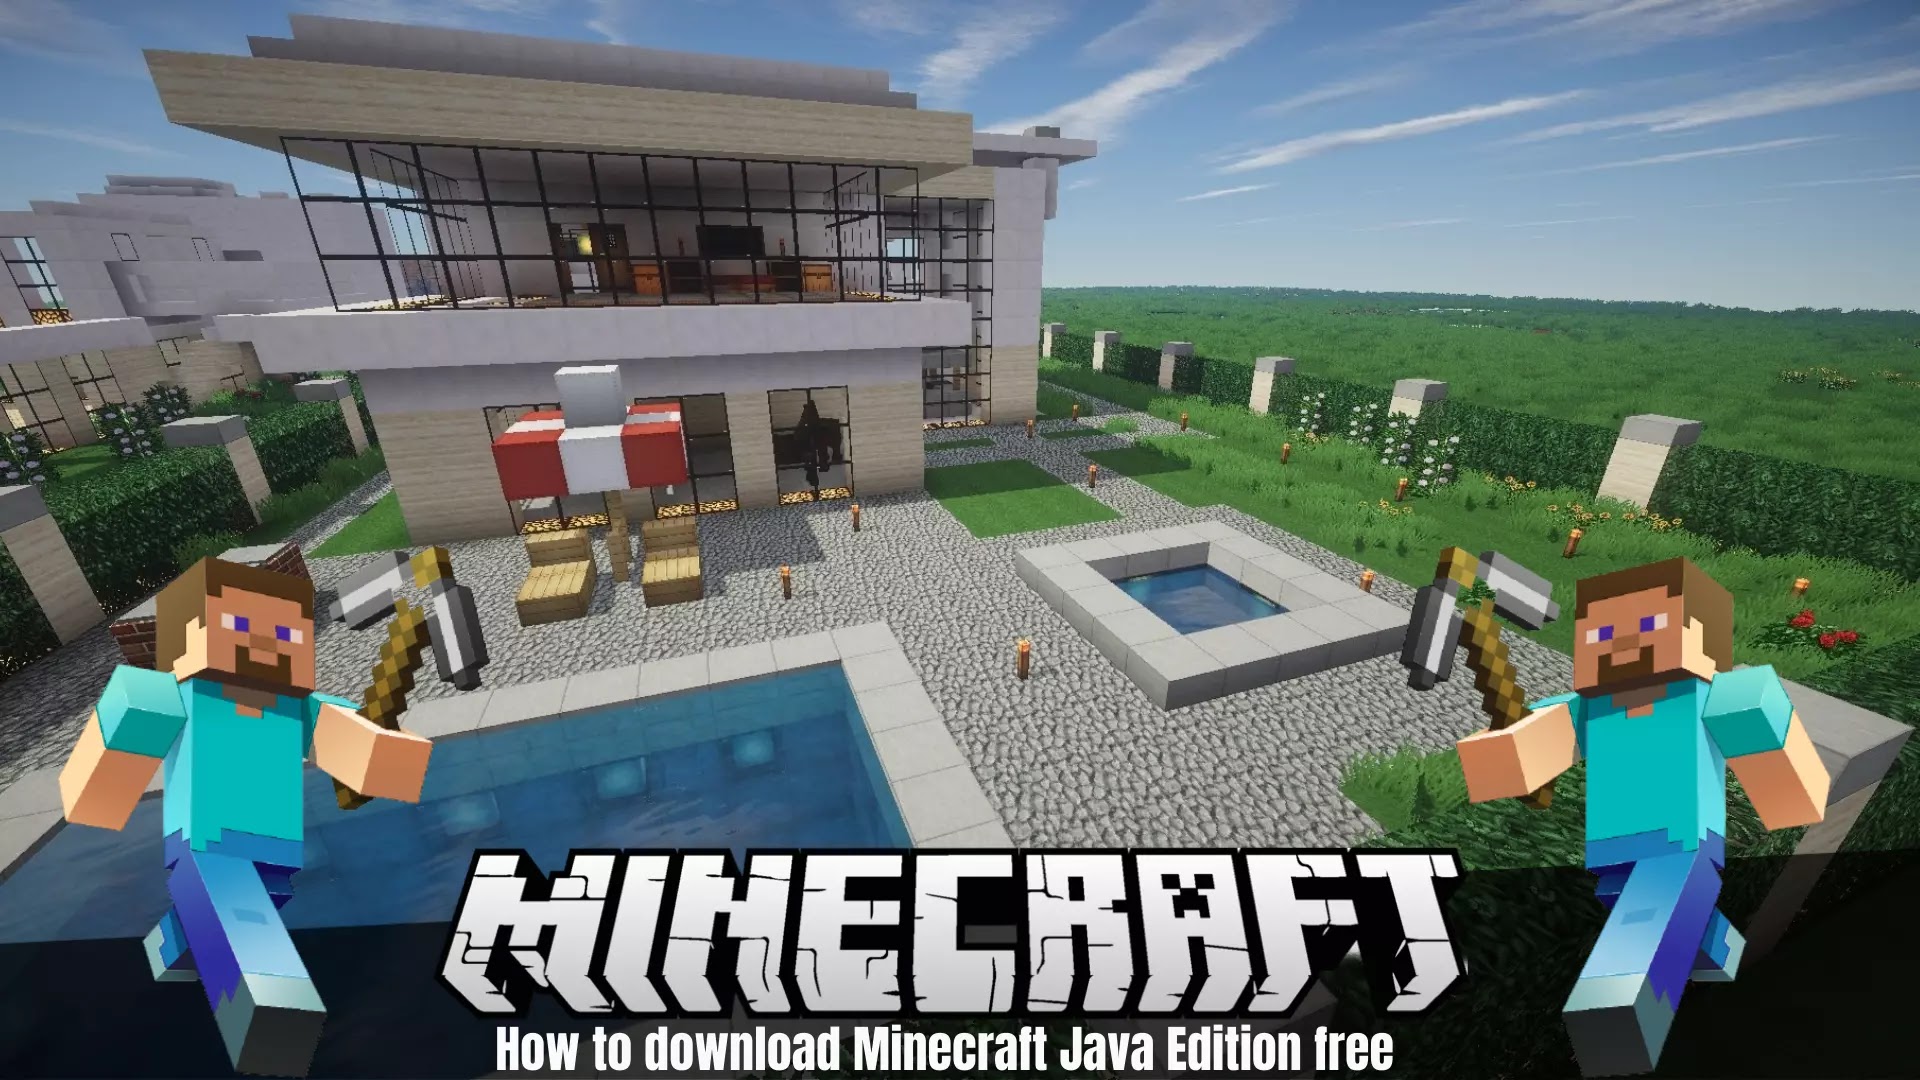 How To Download Minecraft Java Edition Free